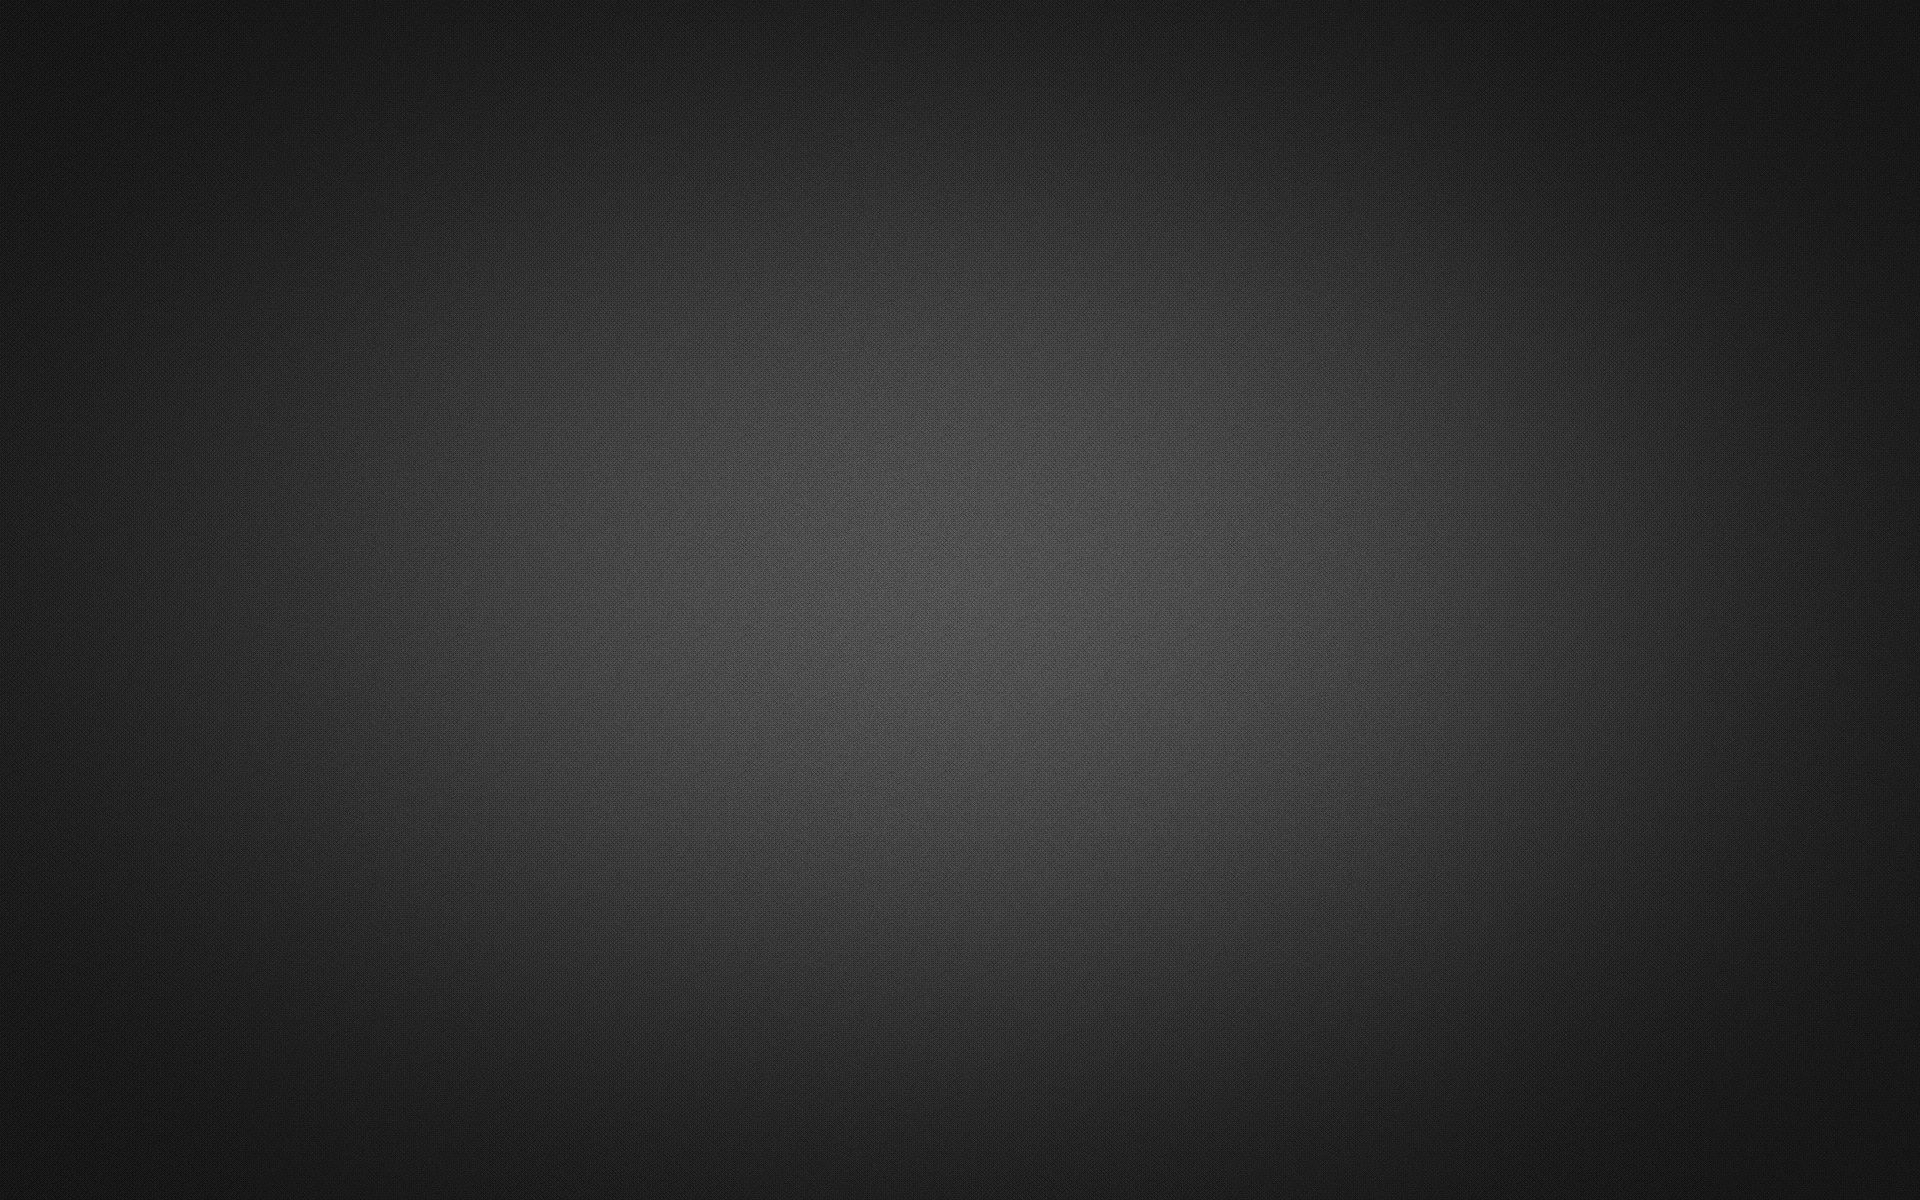 Wallpaper For > Simple Grey And Black Background. Grey wallpaper, Black wallpaper, Dark grey wallpaper